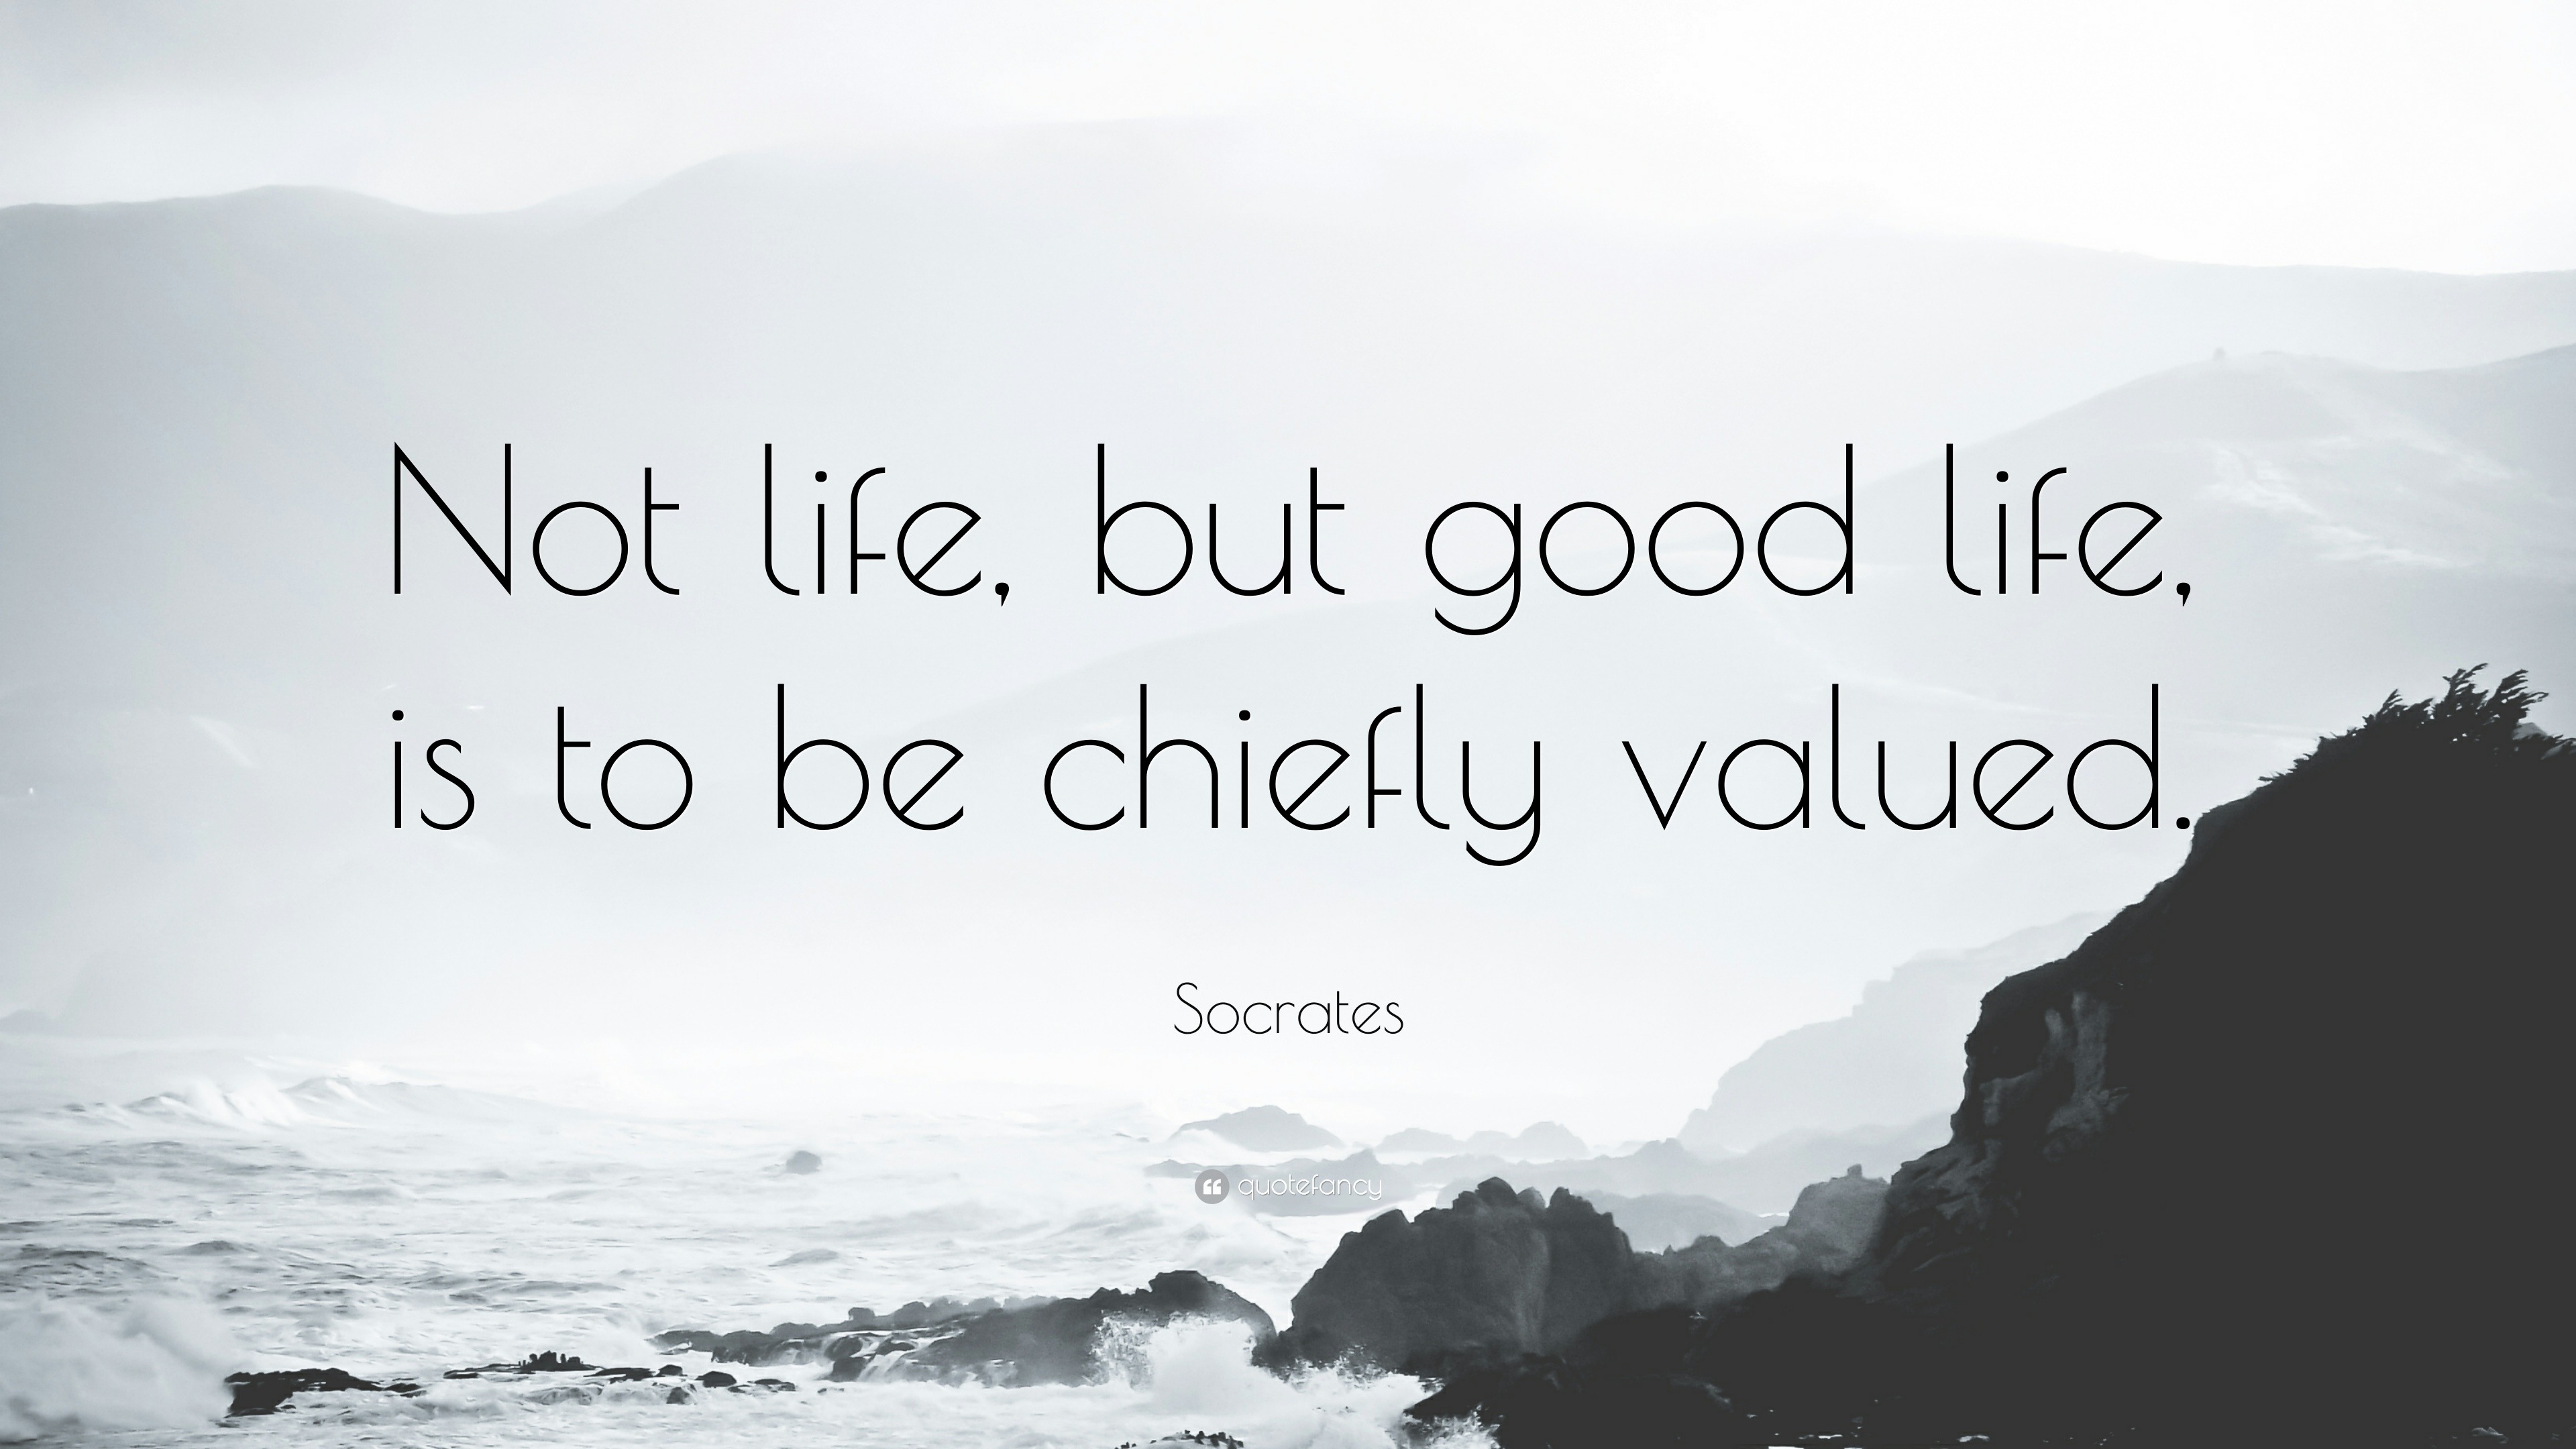 Socrates Quote “Not life but good life is to be chiefly valued